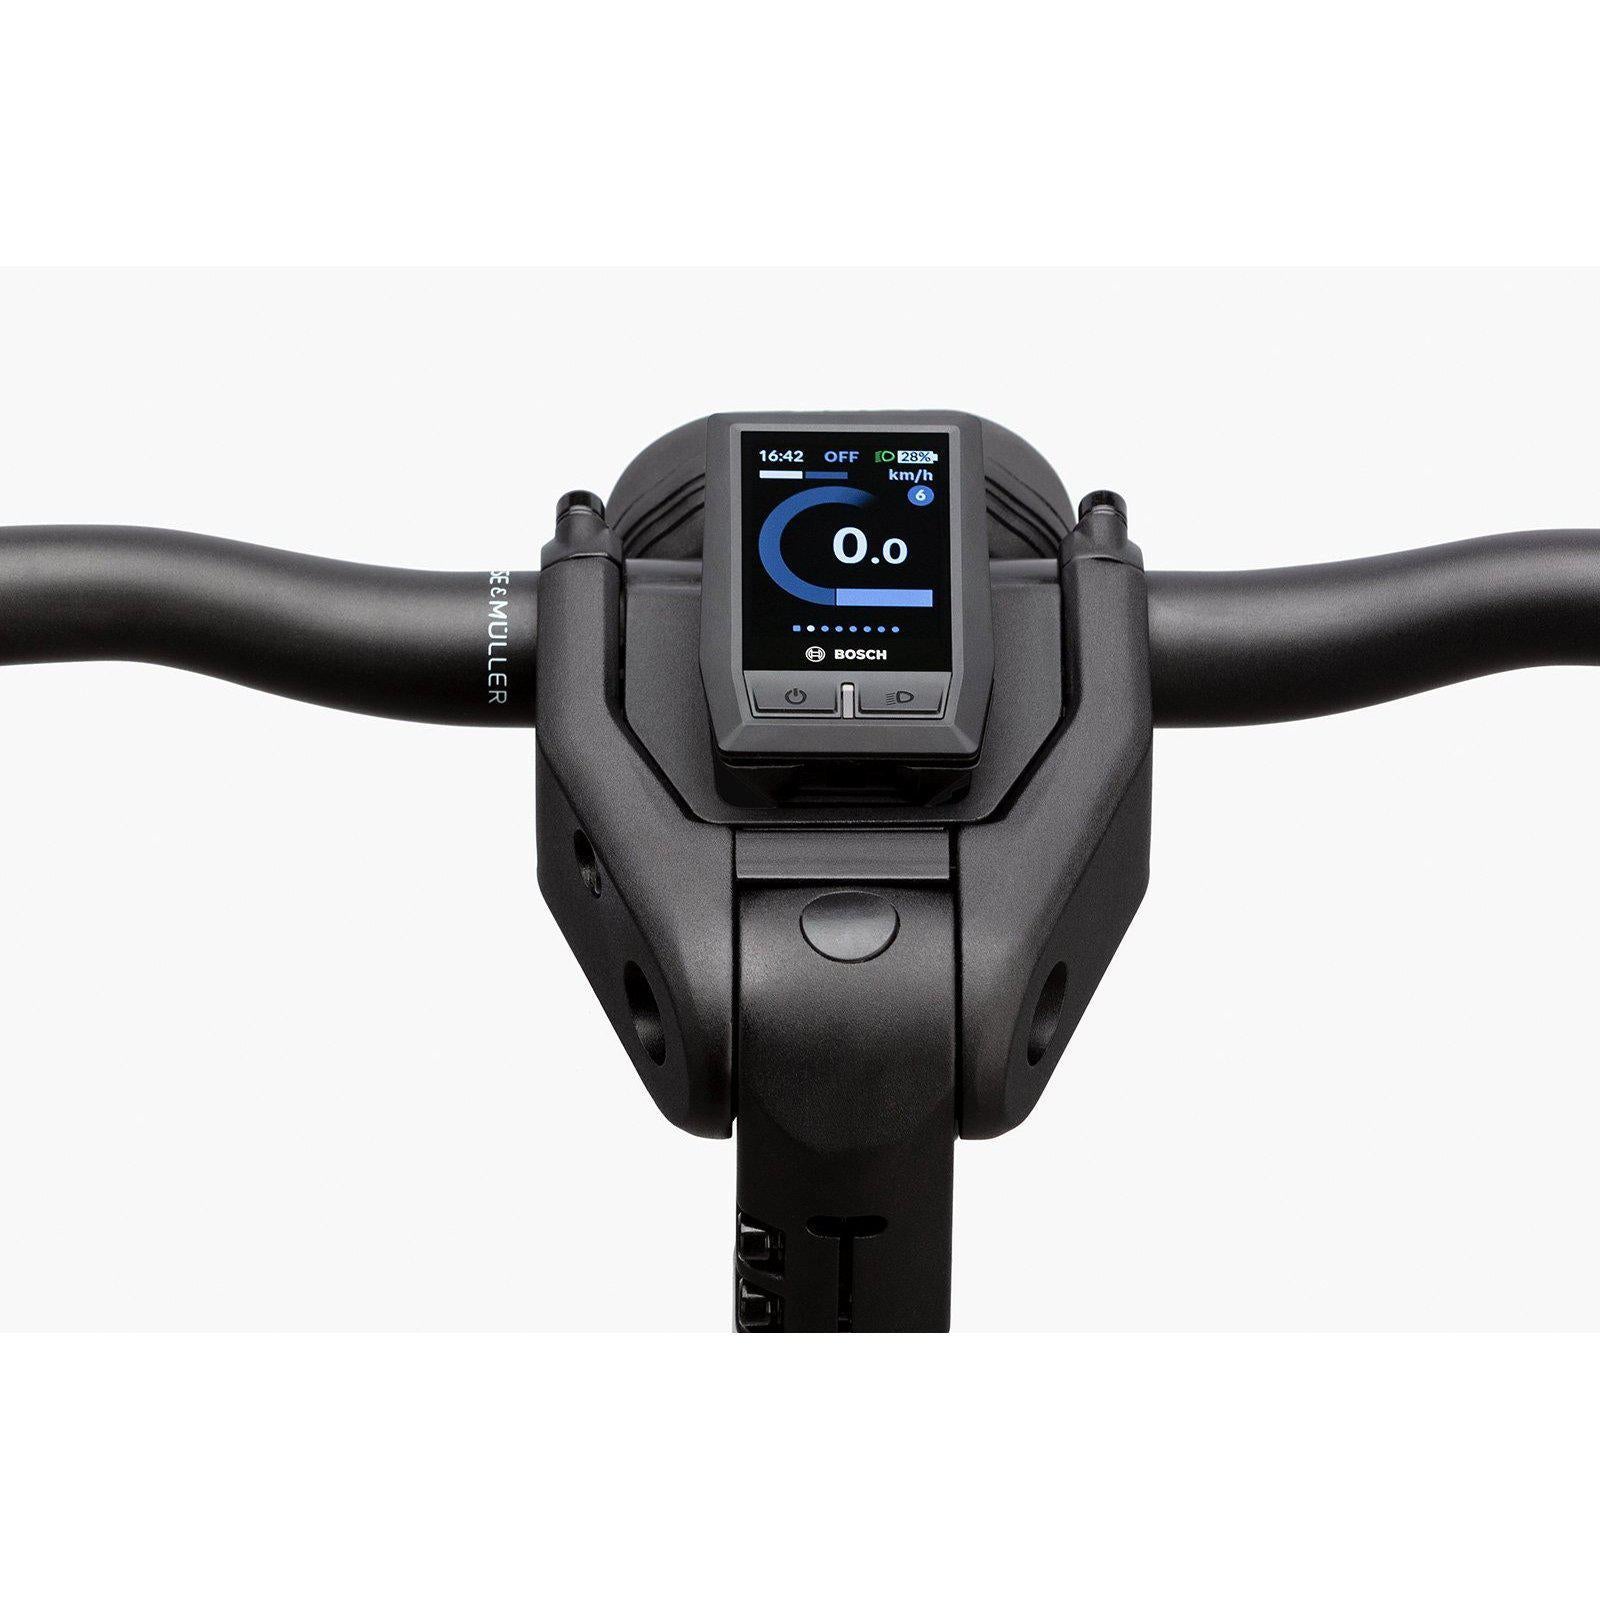 Riese & Müller Electric Bikes Charger3 Mixte GT Rohloff-Oregon E-Bikes